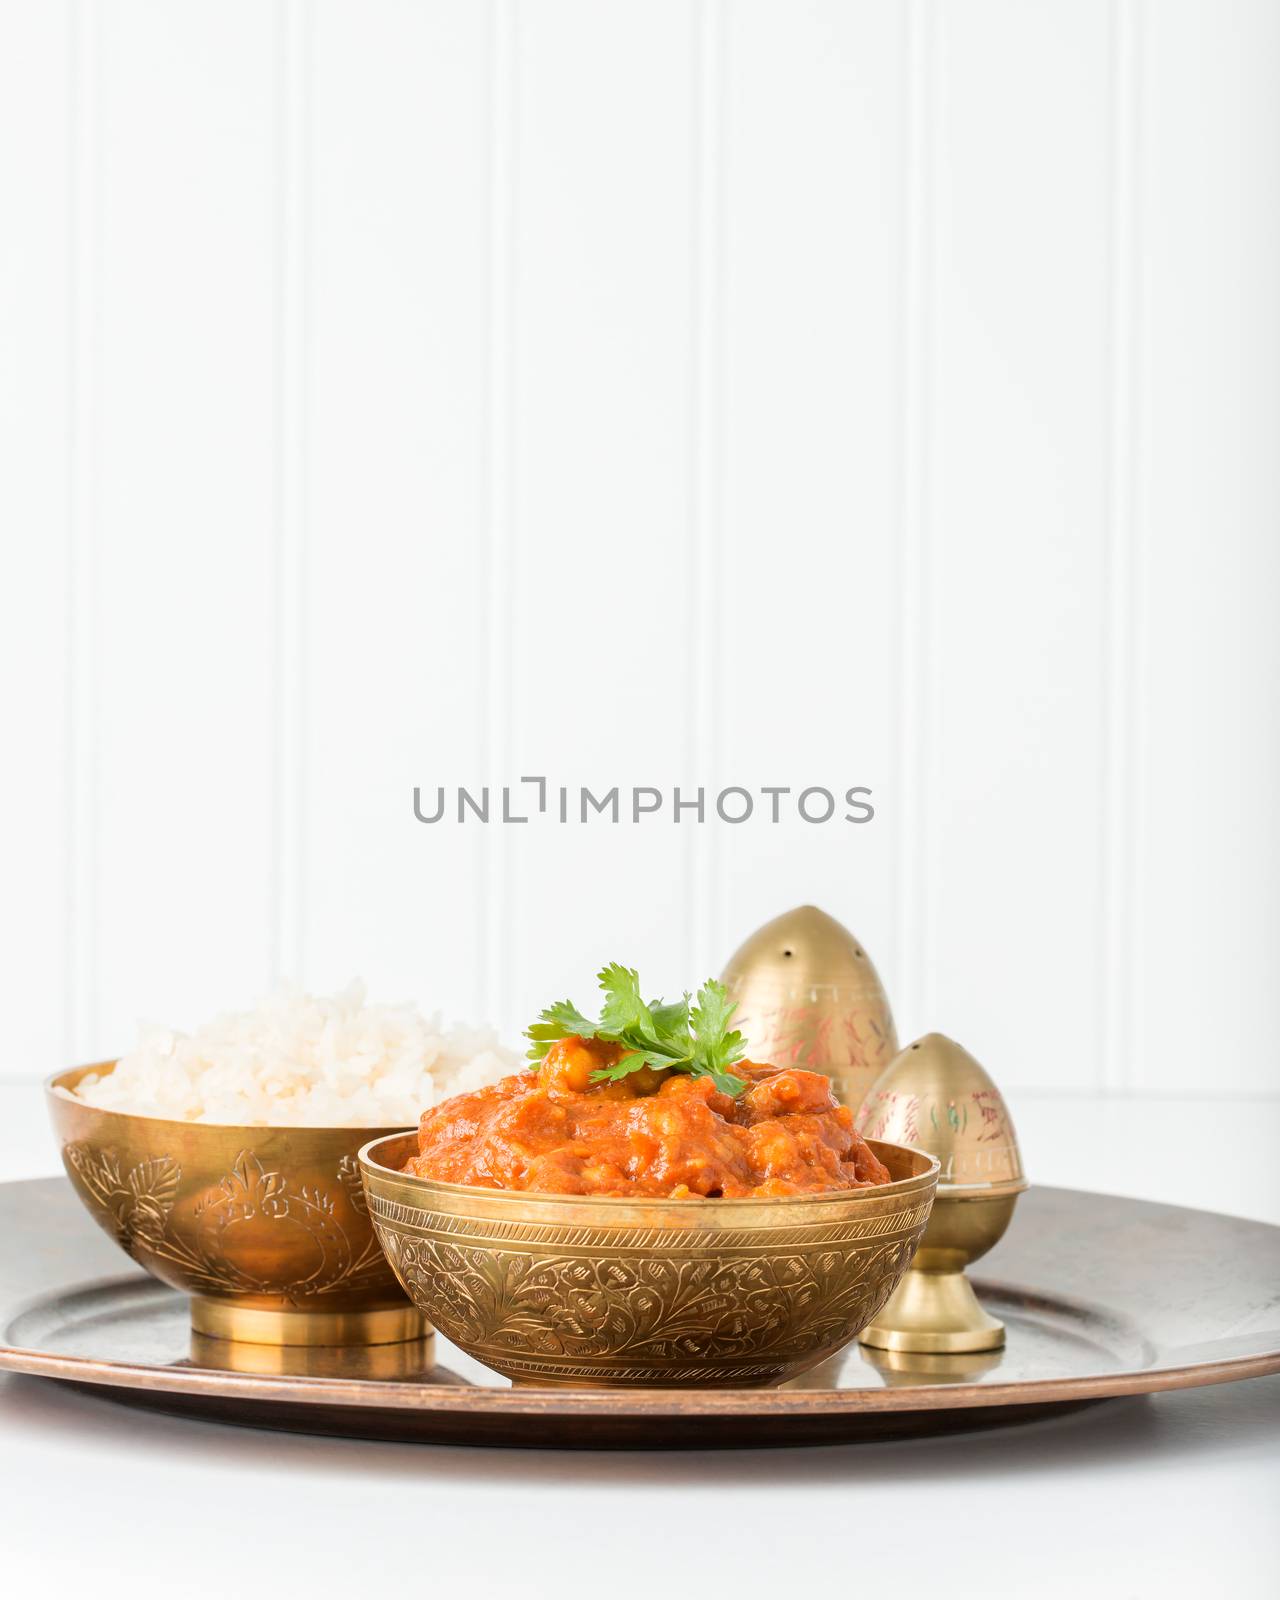 East Indian Cuisine by billberryphotography